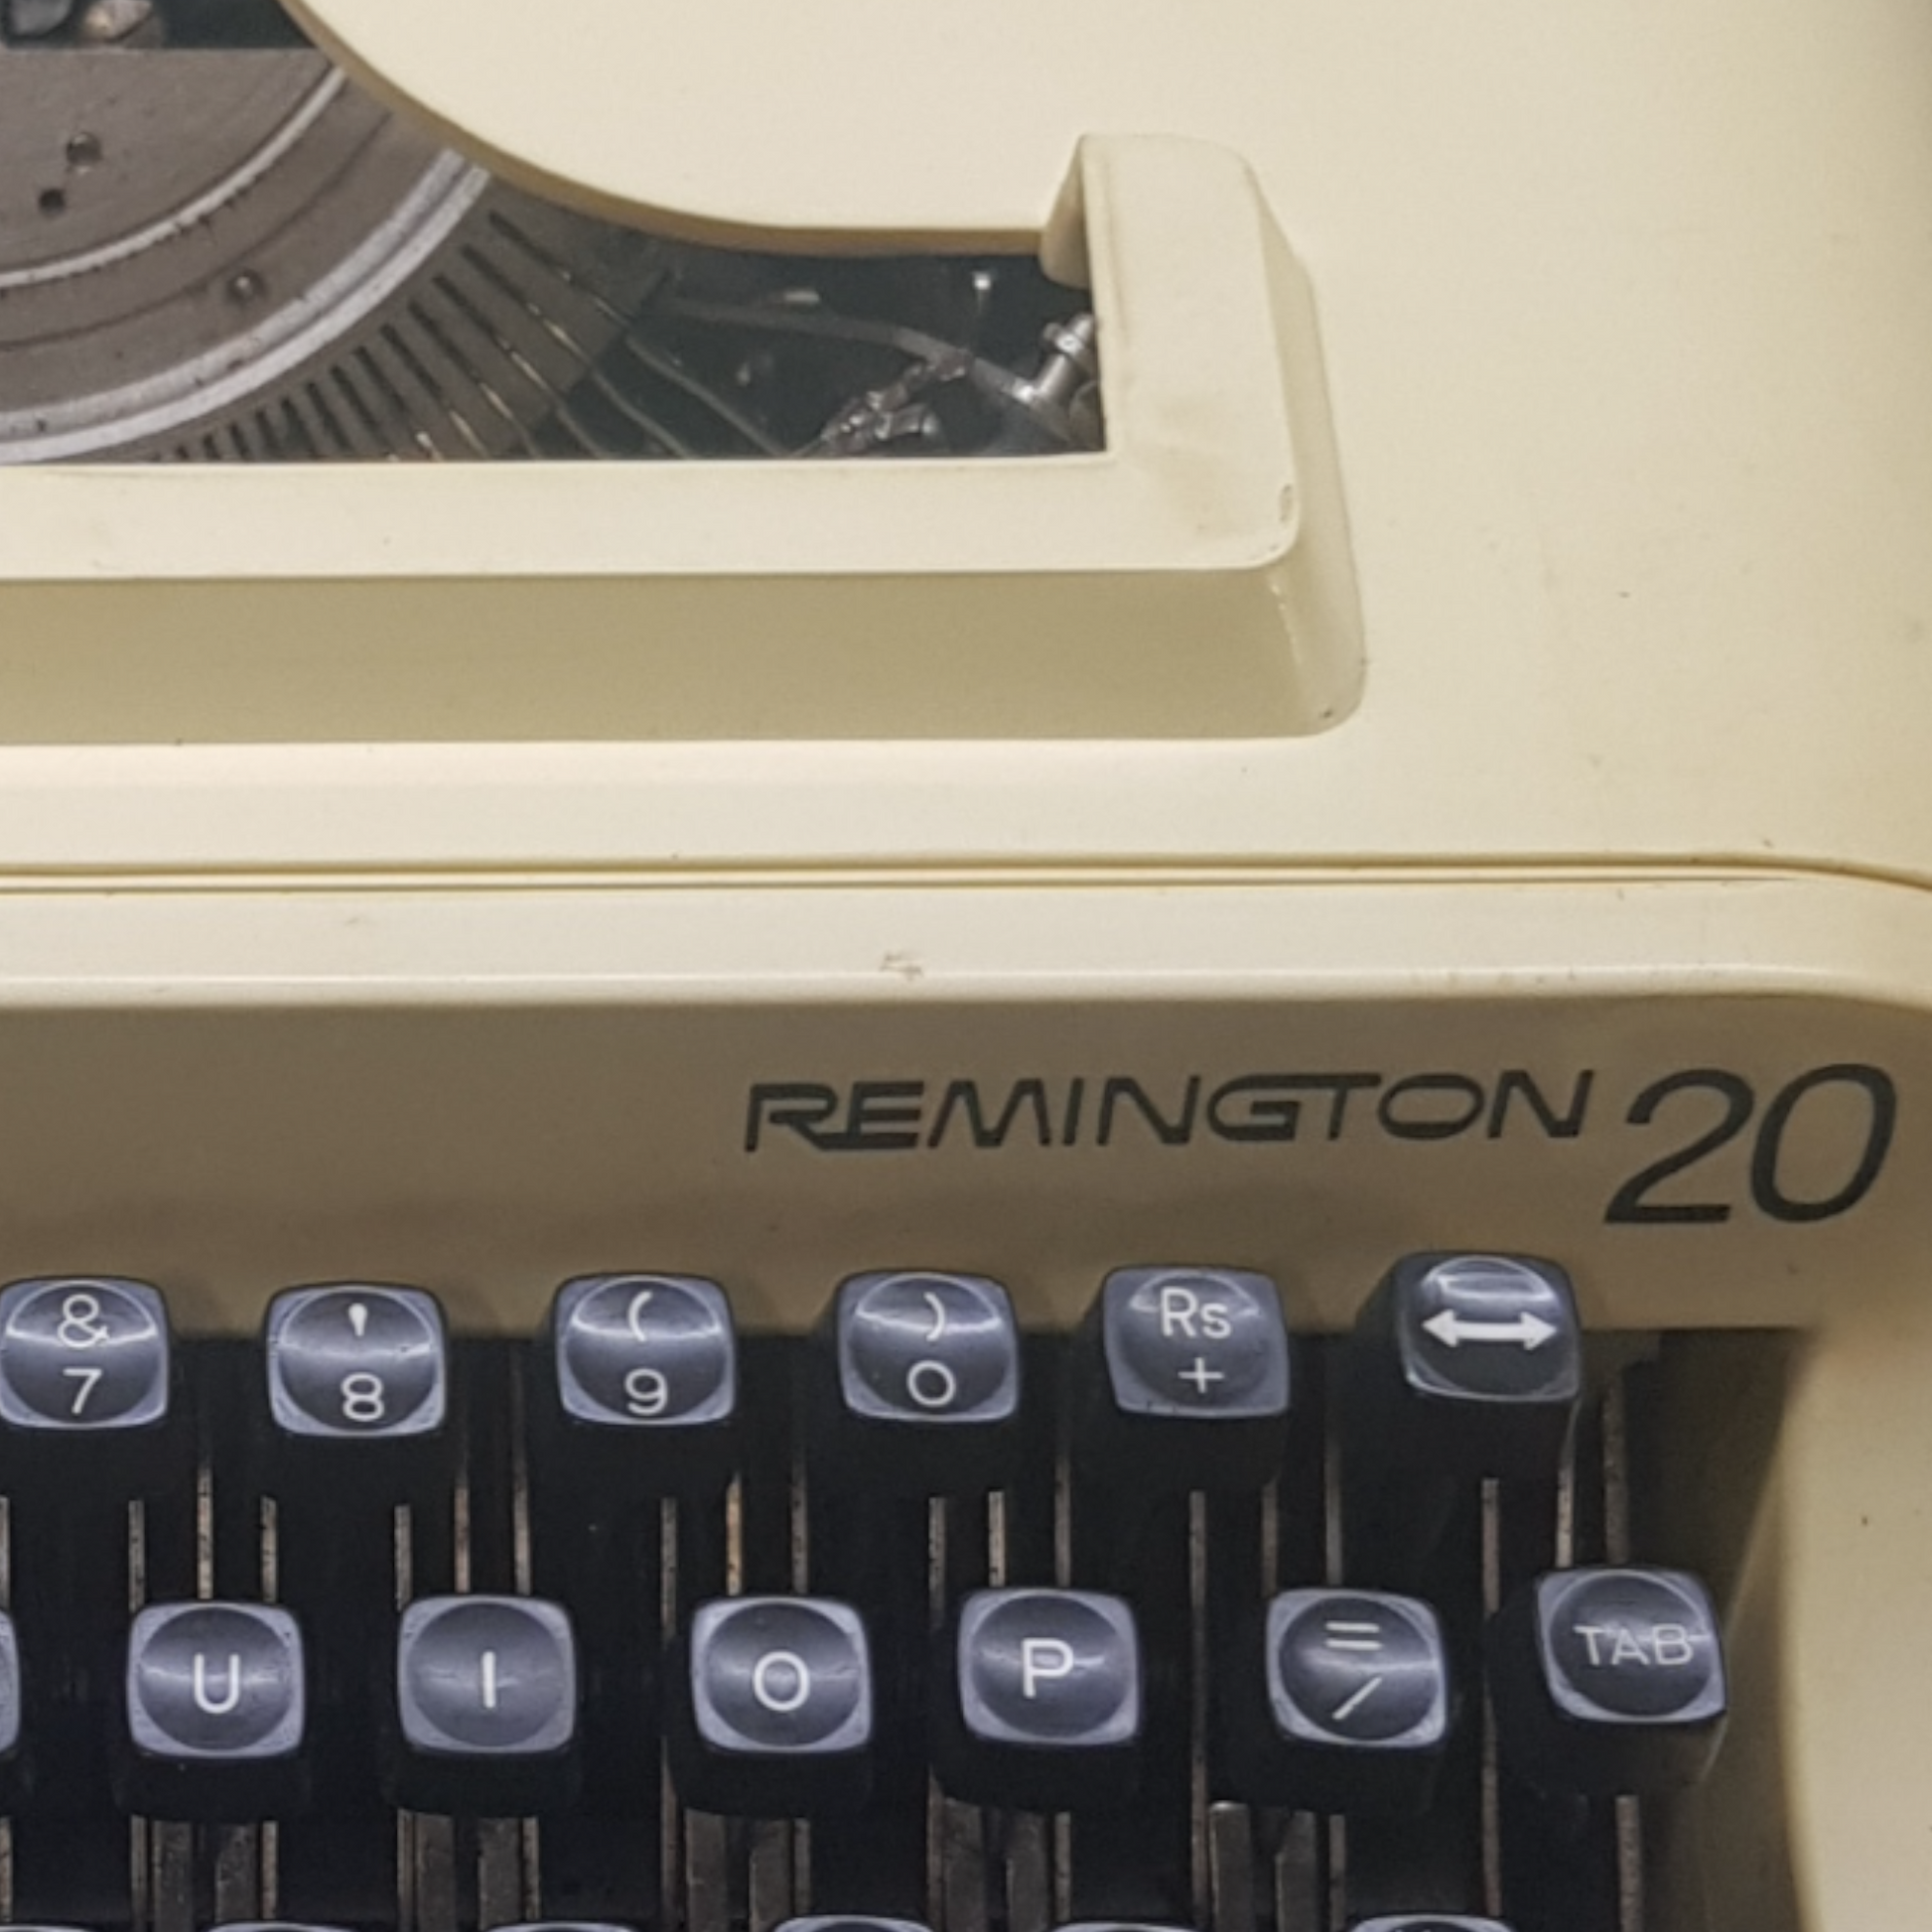 Image of Remington 20 Typewriter Portable Typewriter. Made with Fibre. Made in India. Available with Carry Cover from Universal Typewriter Company.